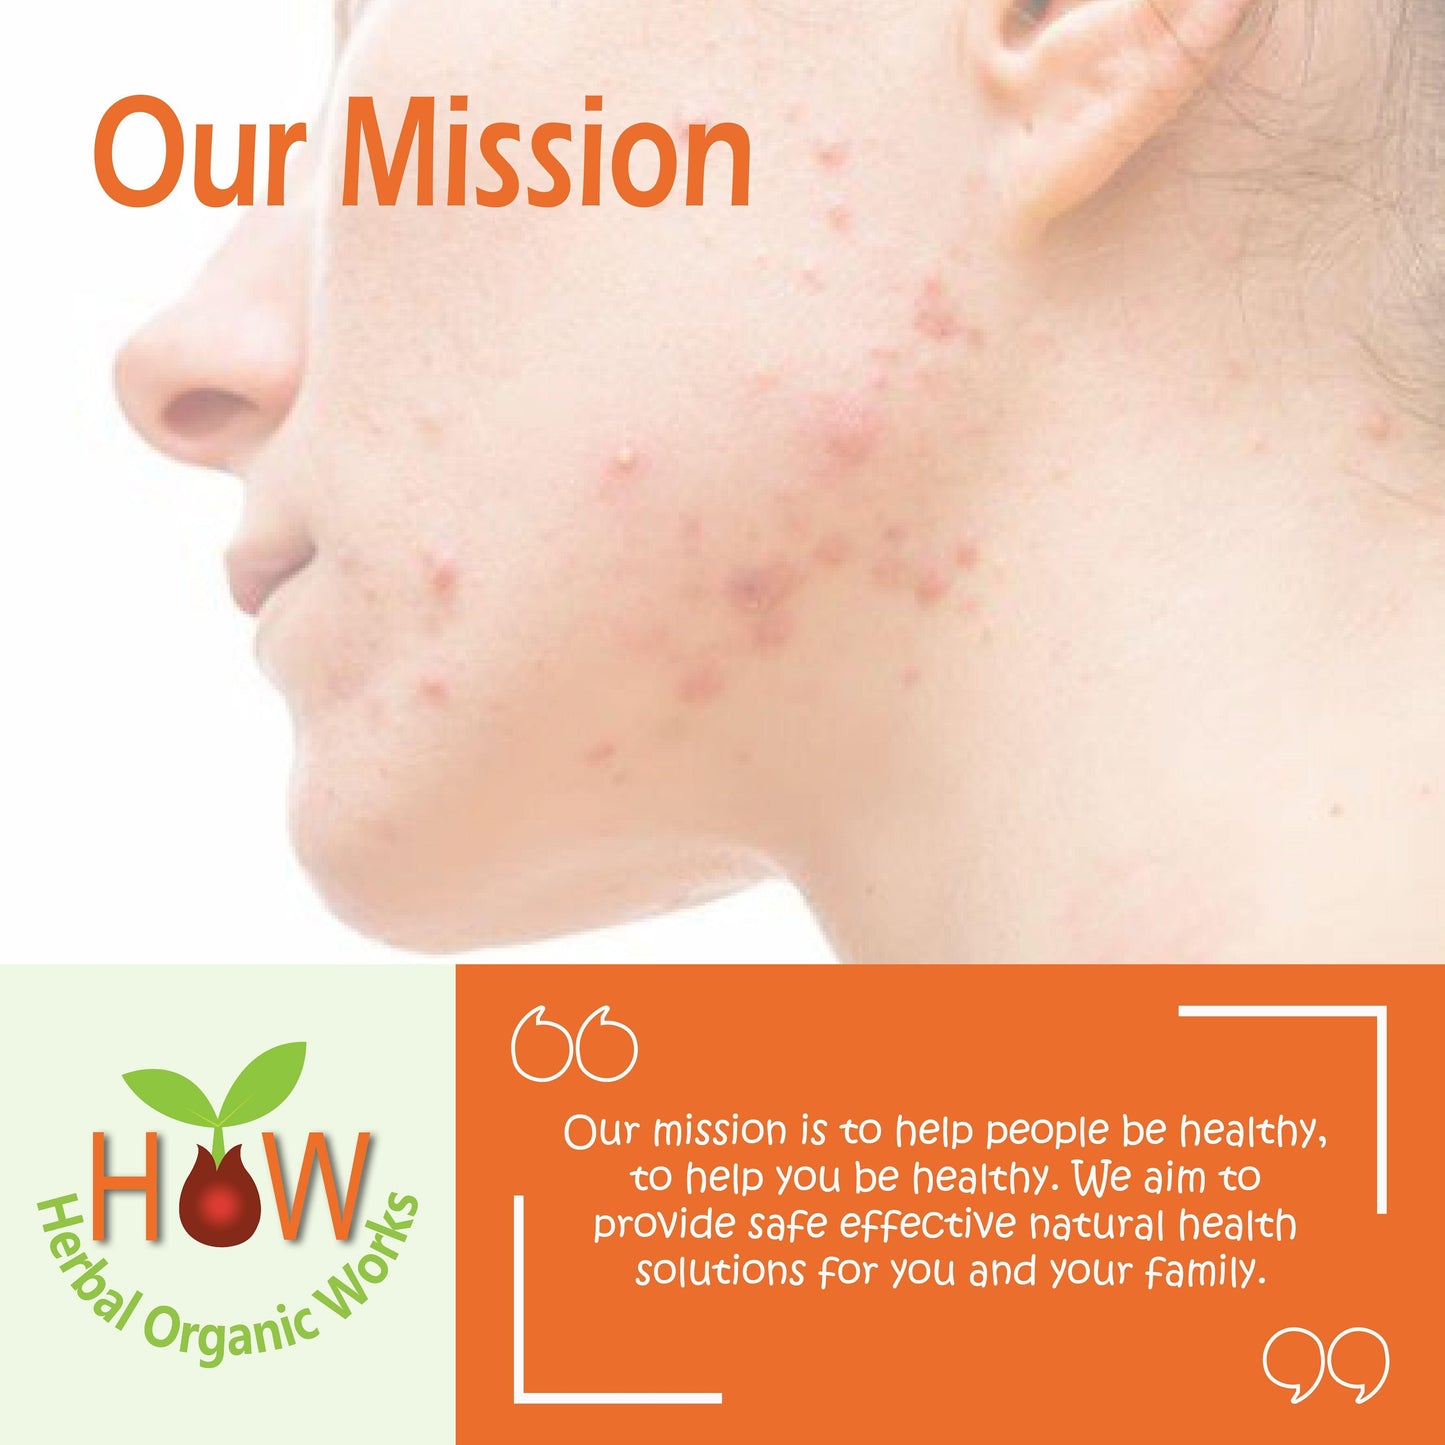 ACNE AND PIMPLES SOLUTION-(HOW38)